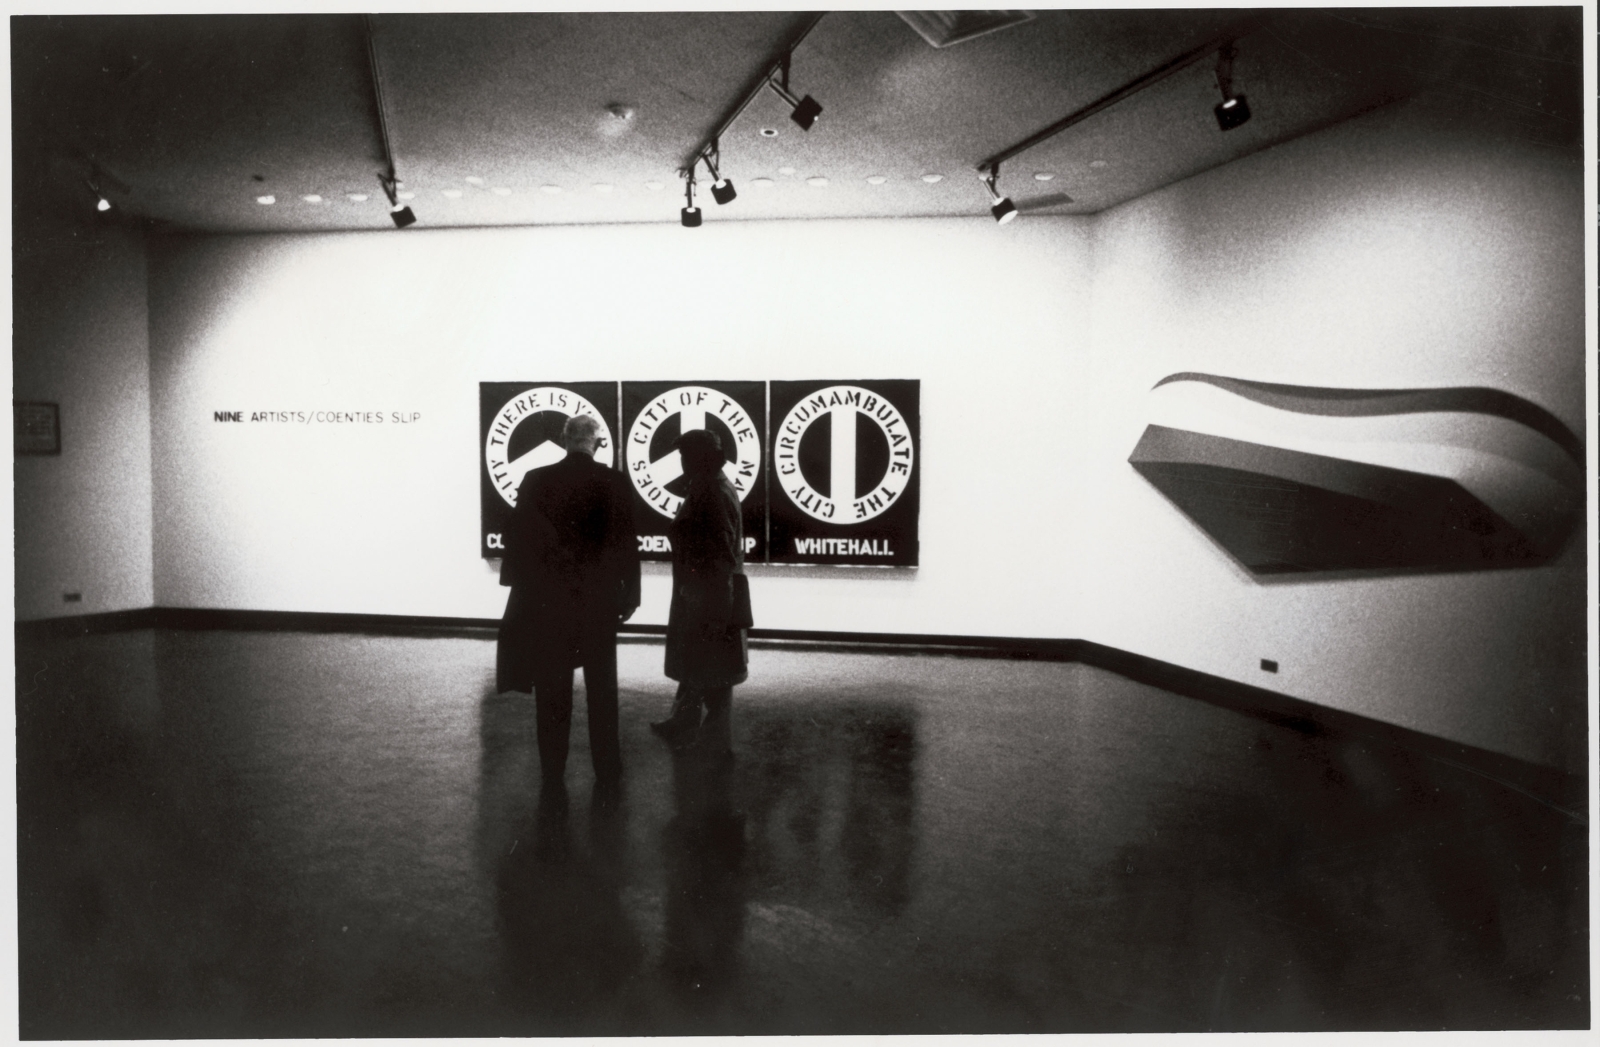 Installation view of Indiana&rsquo;s The Melville Triptych (1961) and Charles Hinman&rsquo;s Lift (1965) in the exhibition Nine Artists: Coenties Slip at the Whitney Museum of American Art Downtown, New York, January 10&ndash;February 14, 1974. Image courtesy of The Star of Hope, Vinalhaven, Maine